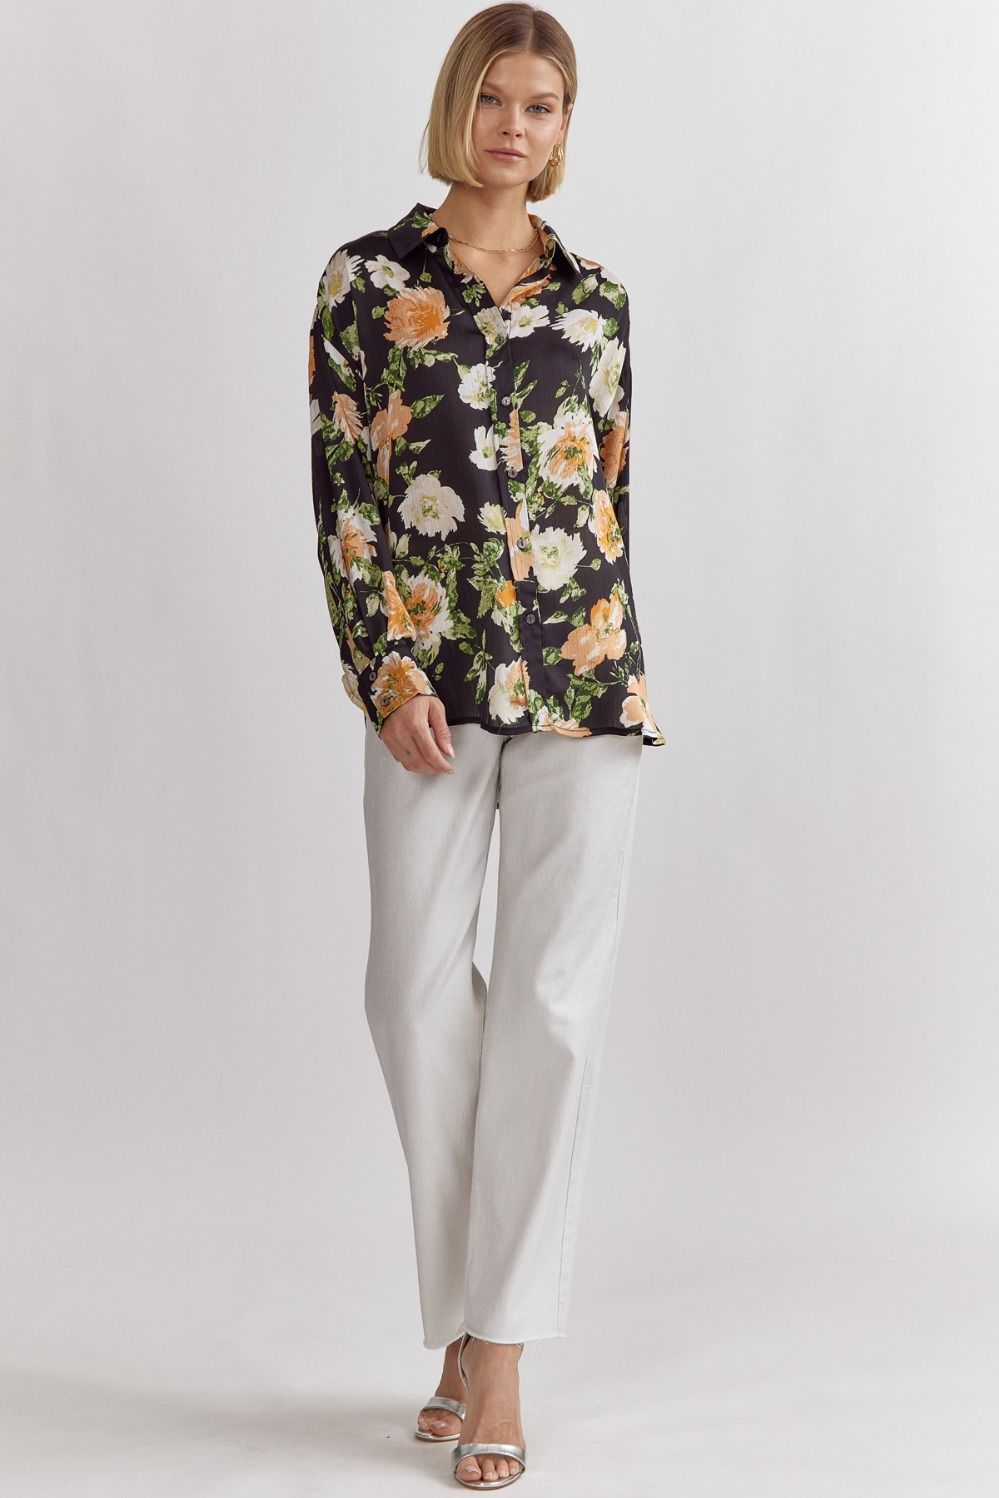 The Peonie Top